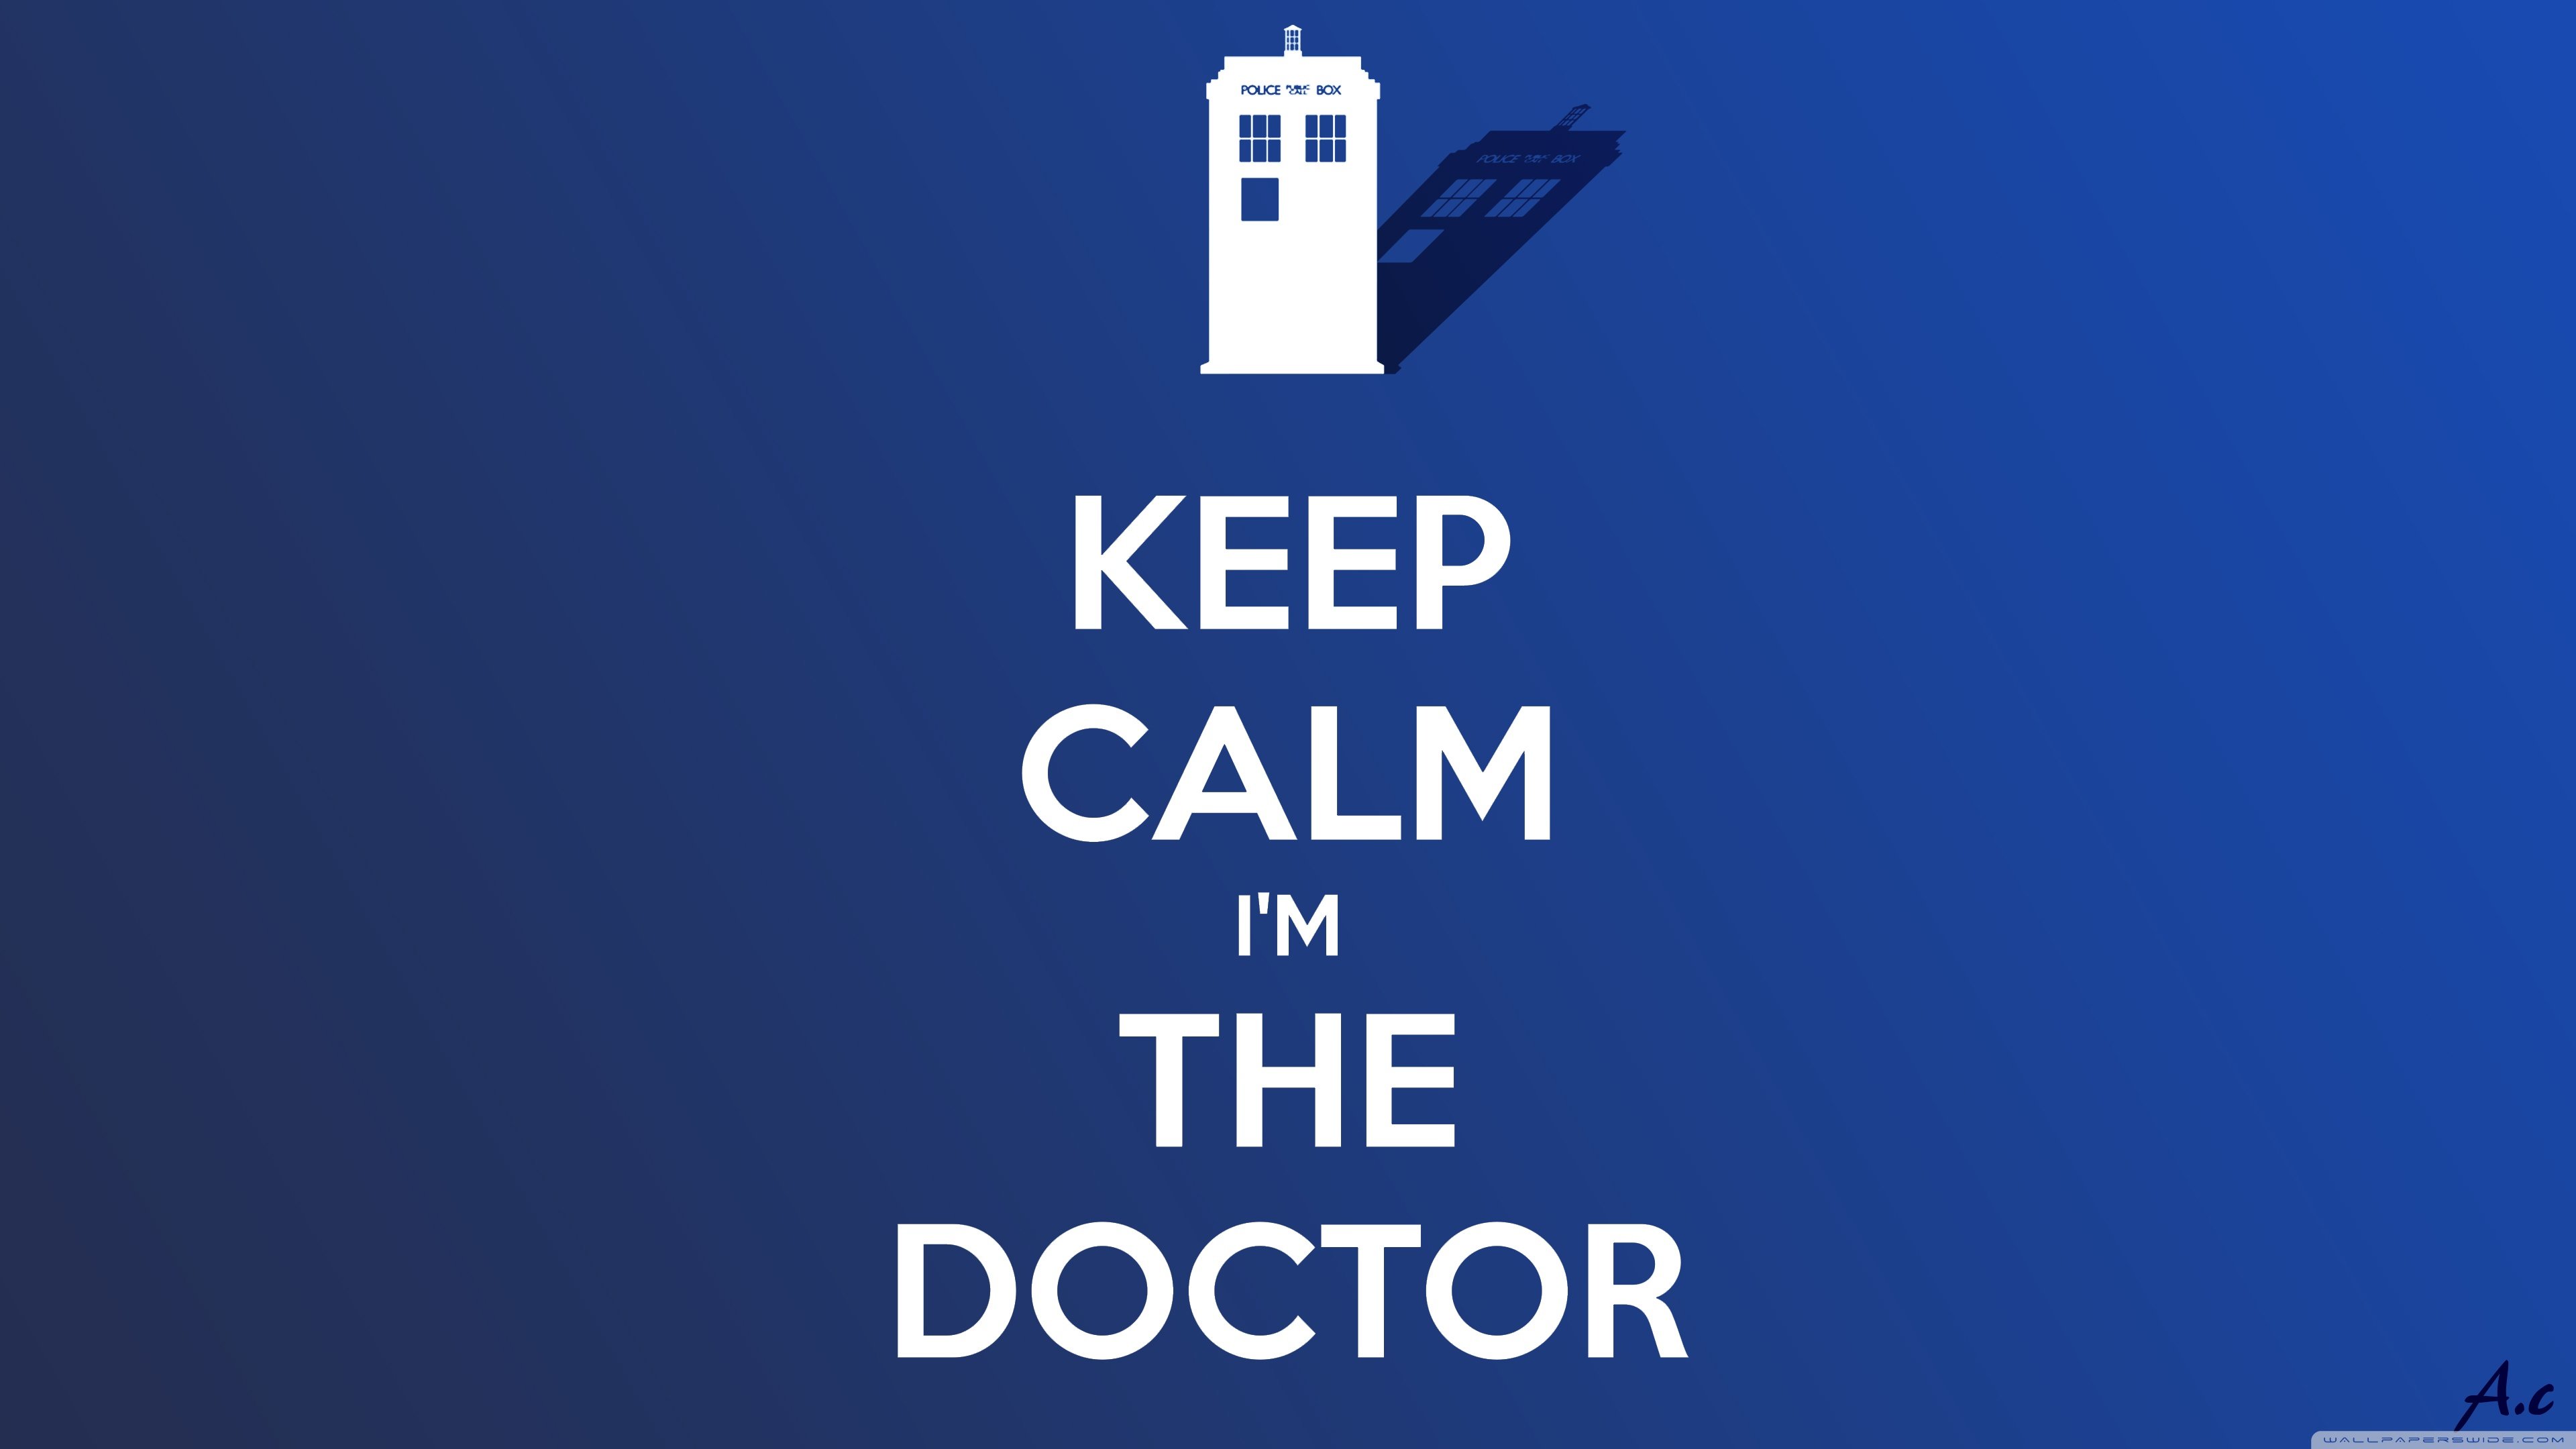 android tardis, tv show, doctor who